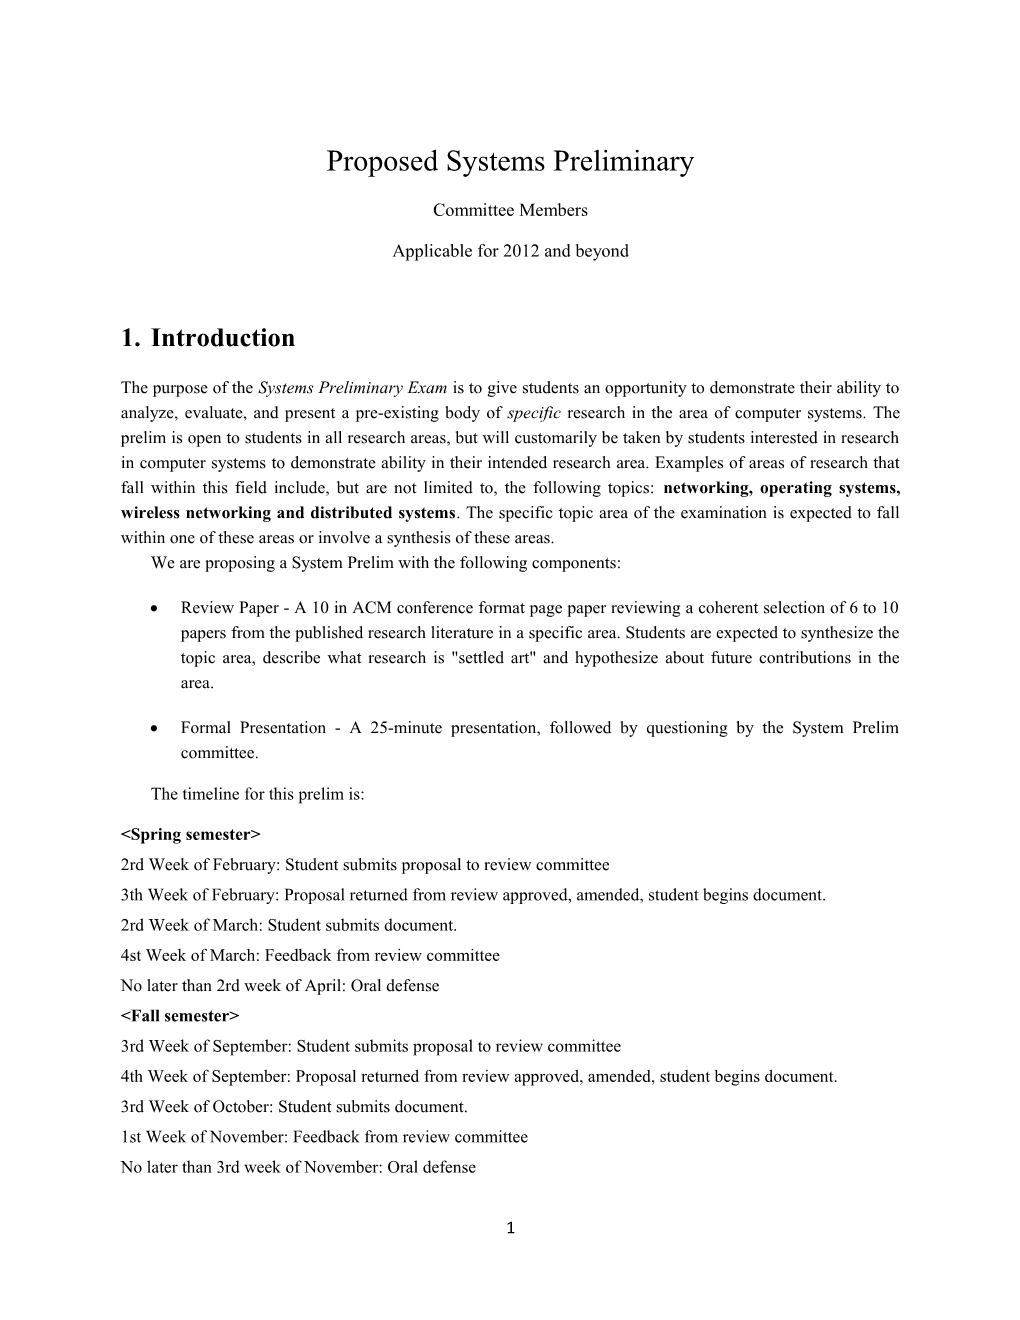 Proposed Systems Preliminary